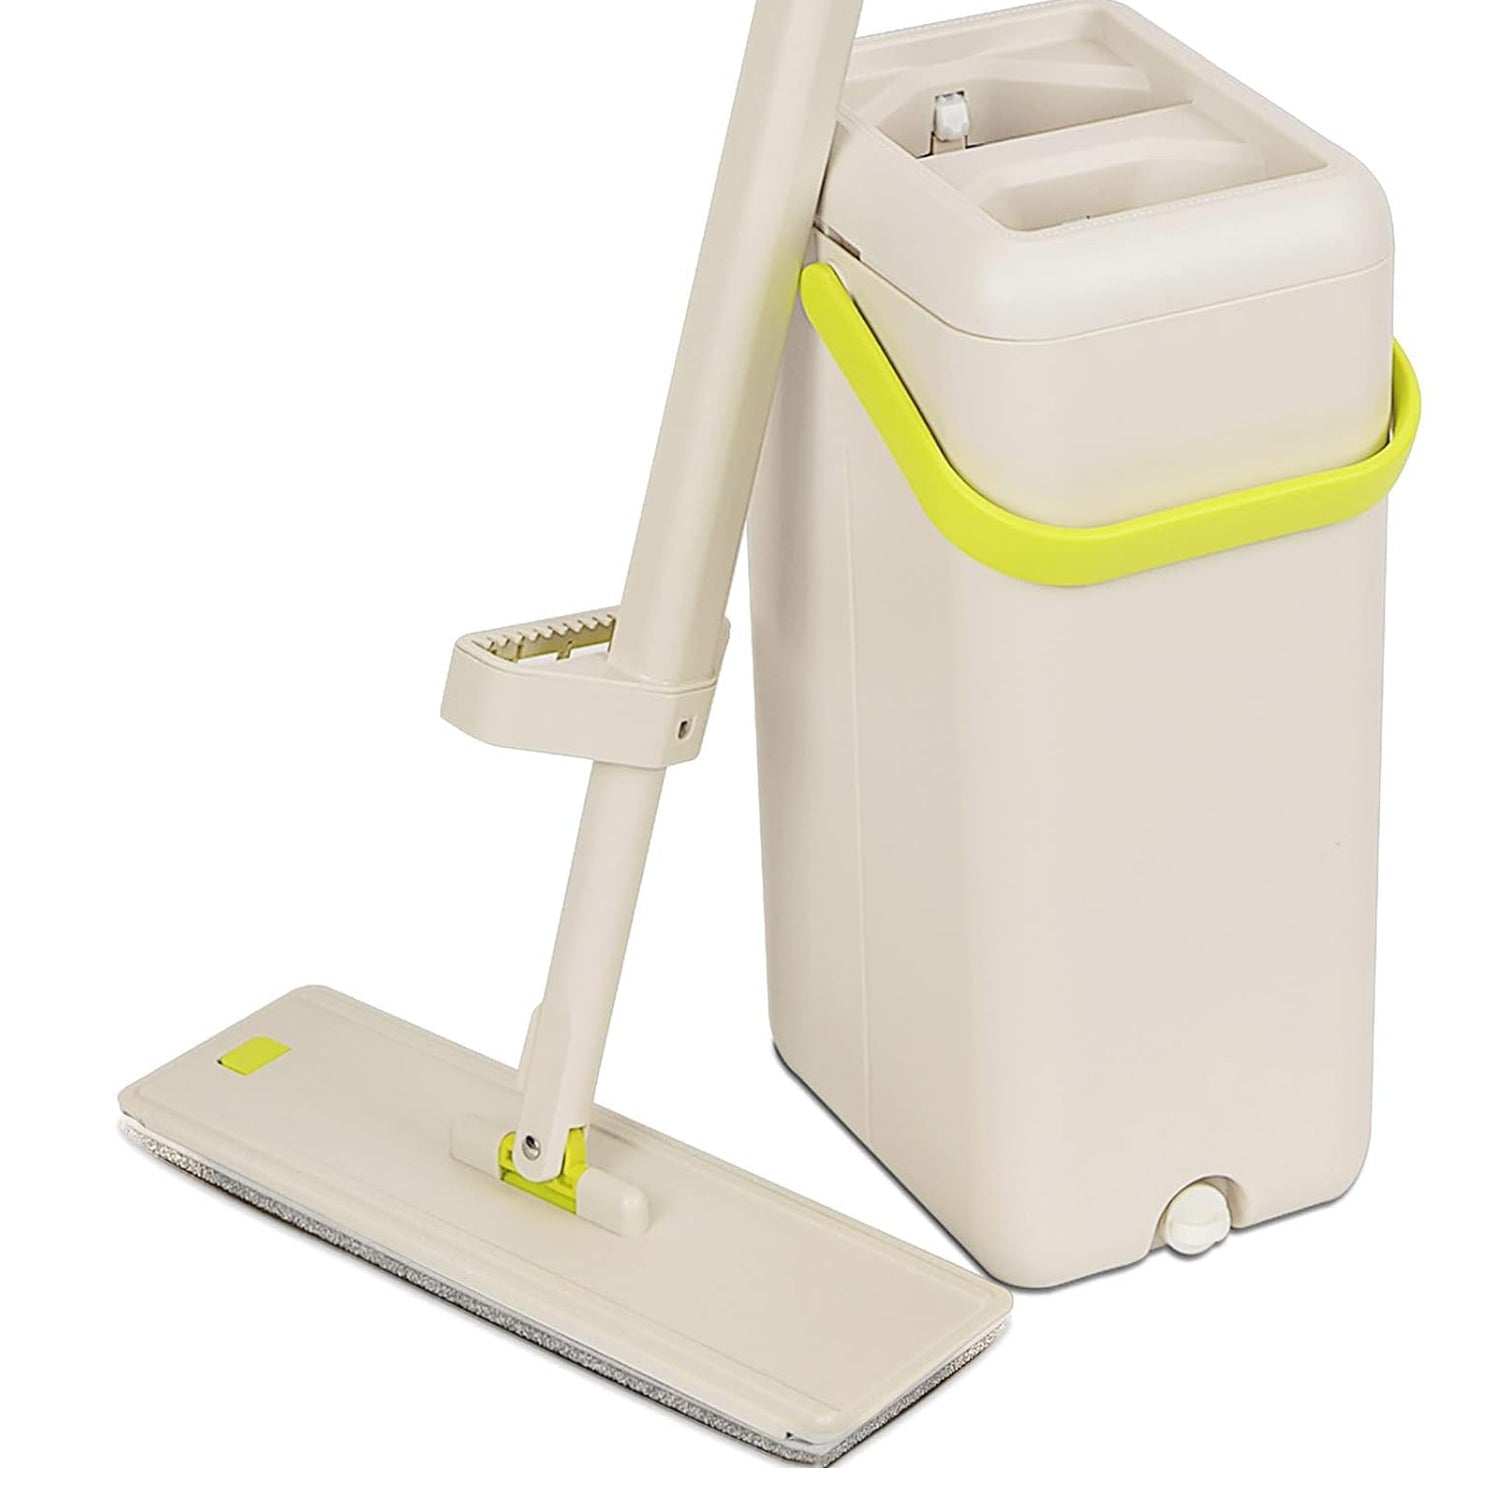 1146 Floor Mop and Bucket Set, Flat Mop for Cleaning with Wringer, Self Clean Damp Mop and Bucket for Hardwood, Laminate, 2 in 1 Hands Free Mop with Washable Microfiber Pad for Wet & Dry Use